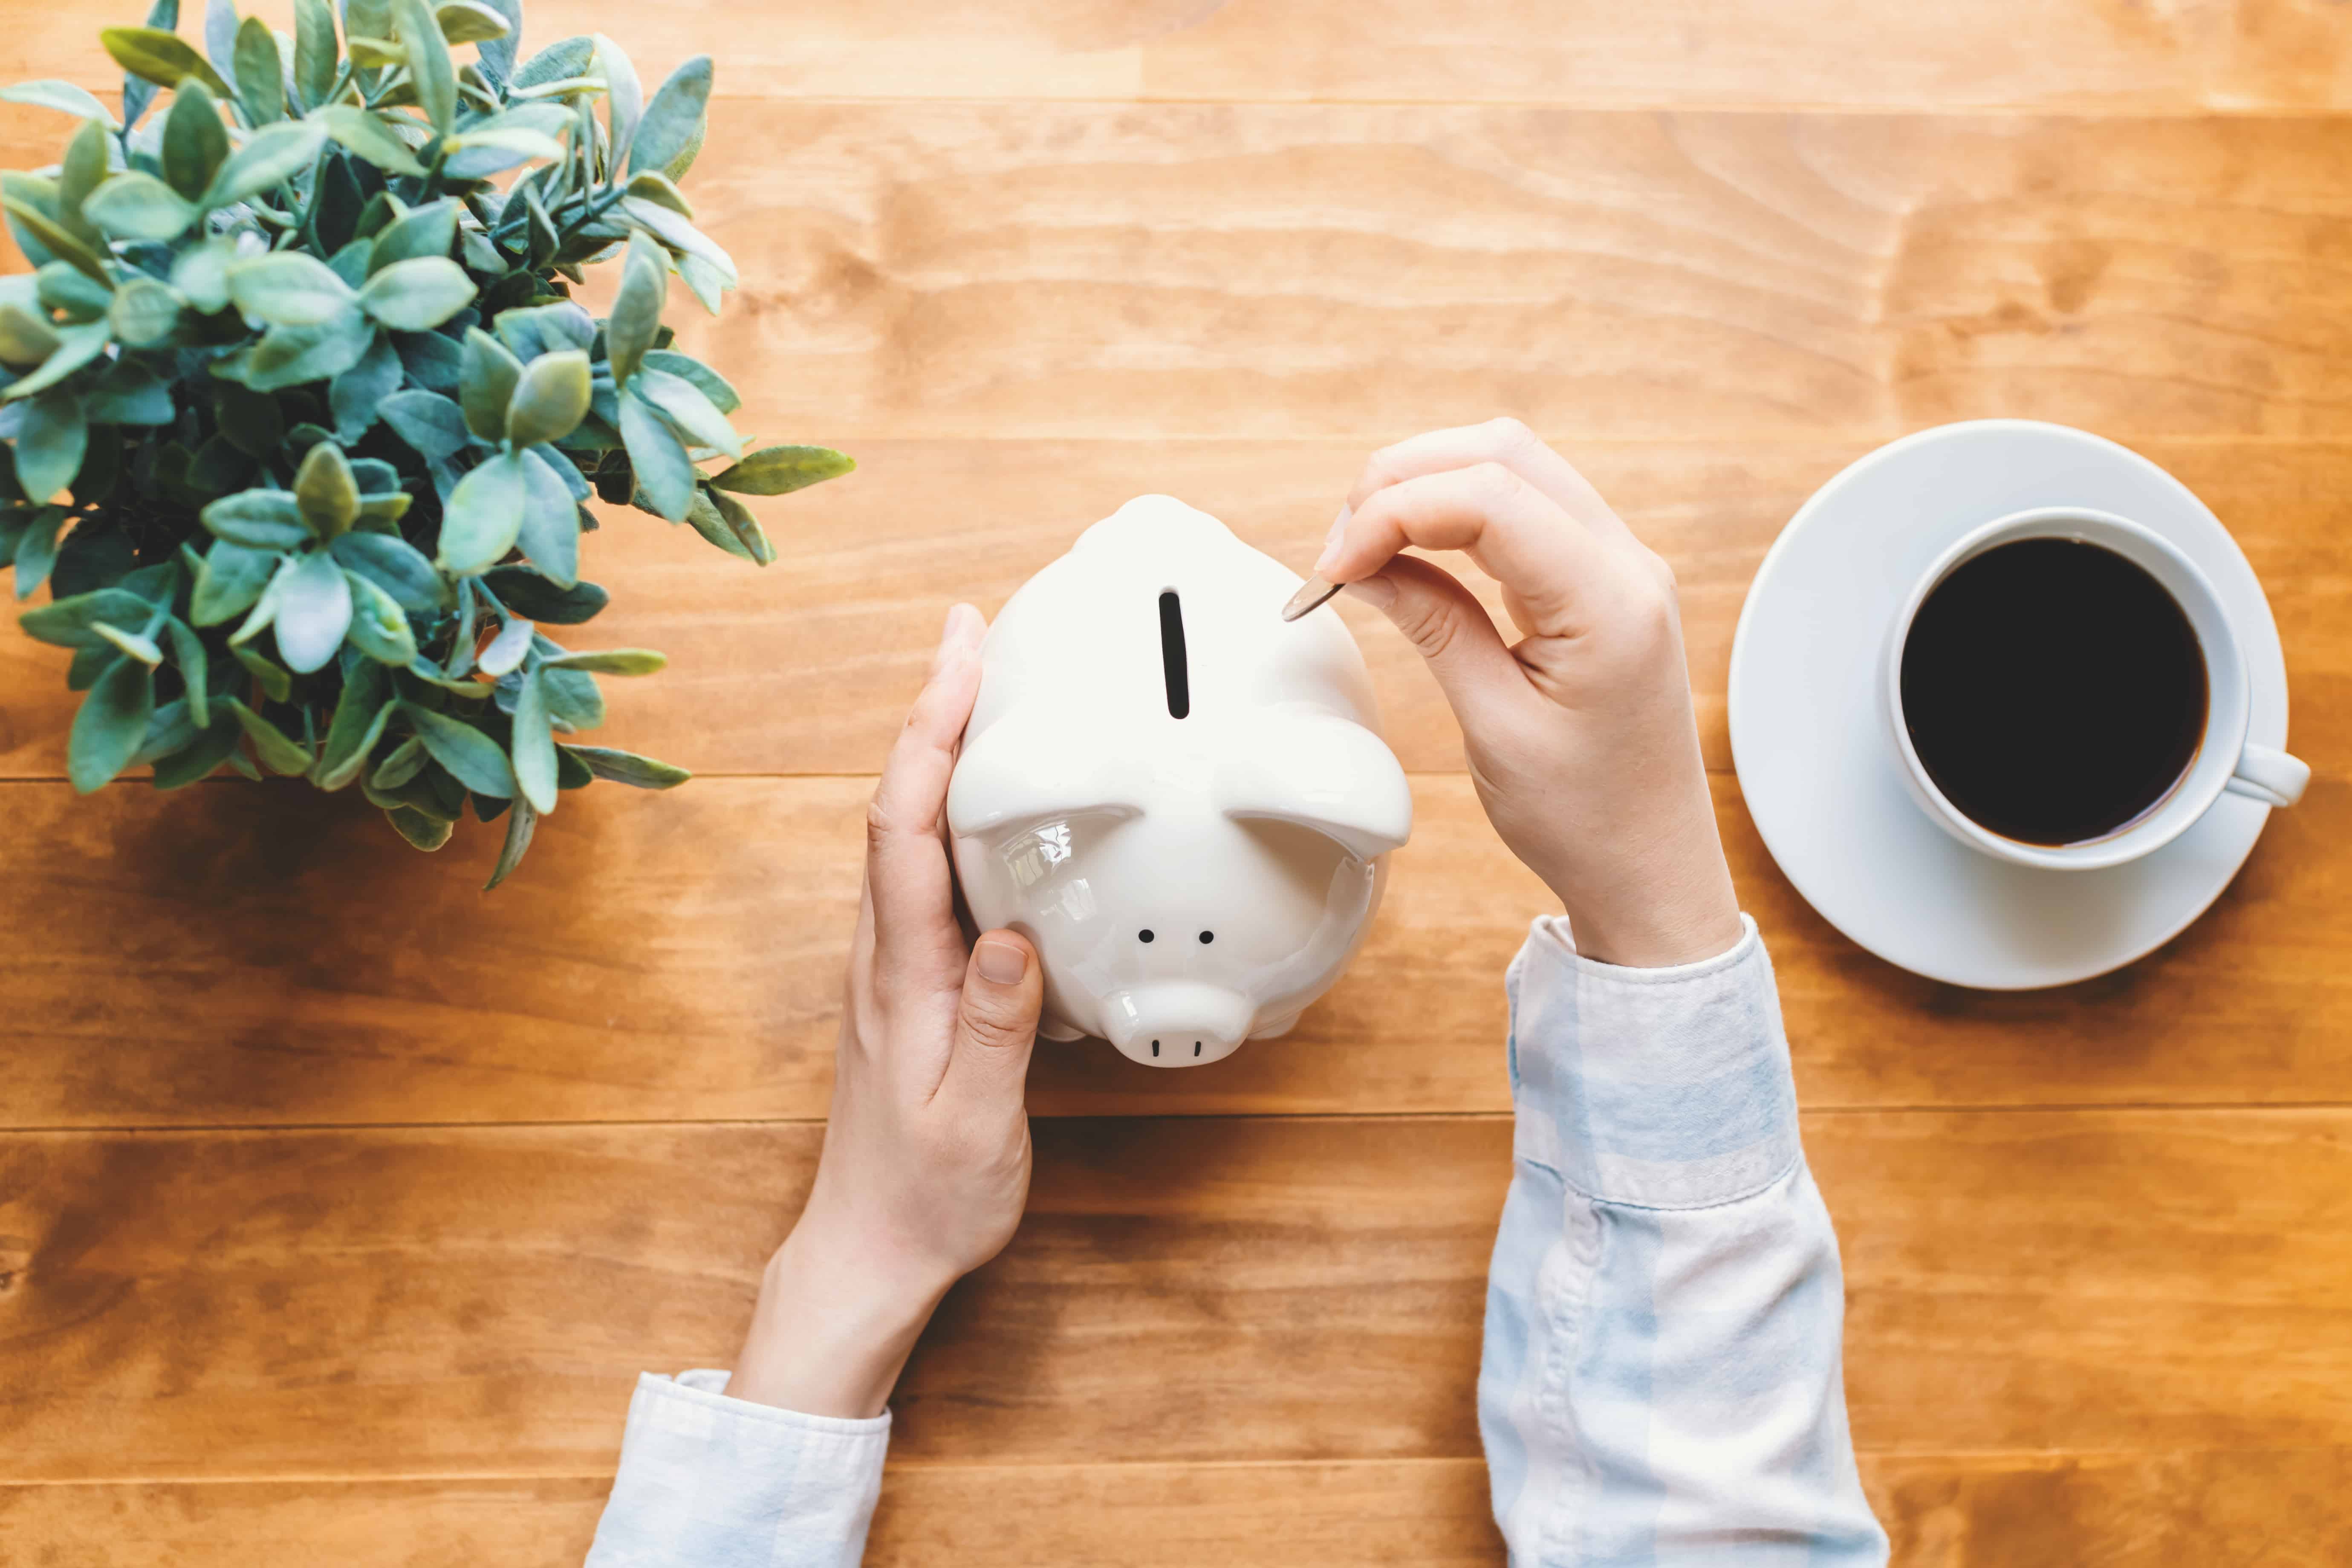 frugal living tips for saving money. Photo of person putting a coin into a white piggy bank.